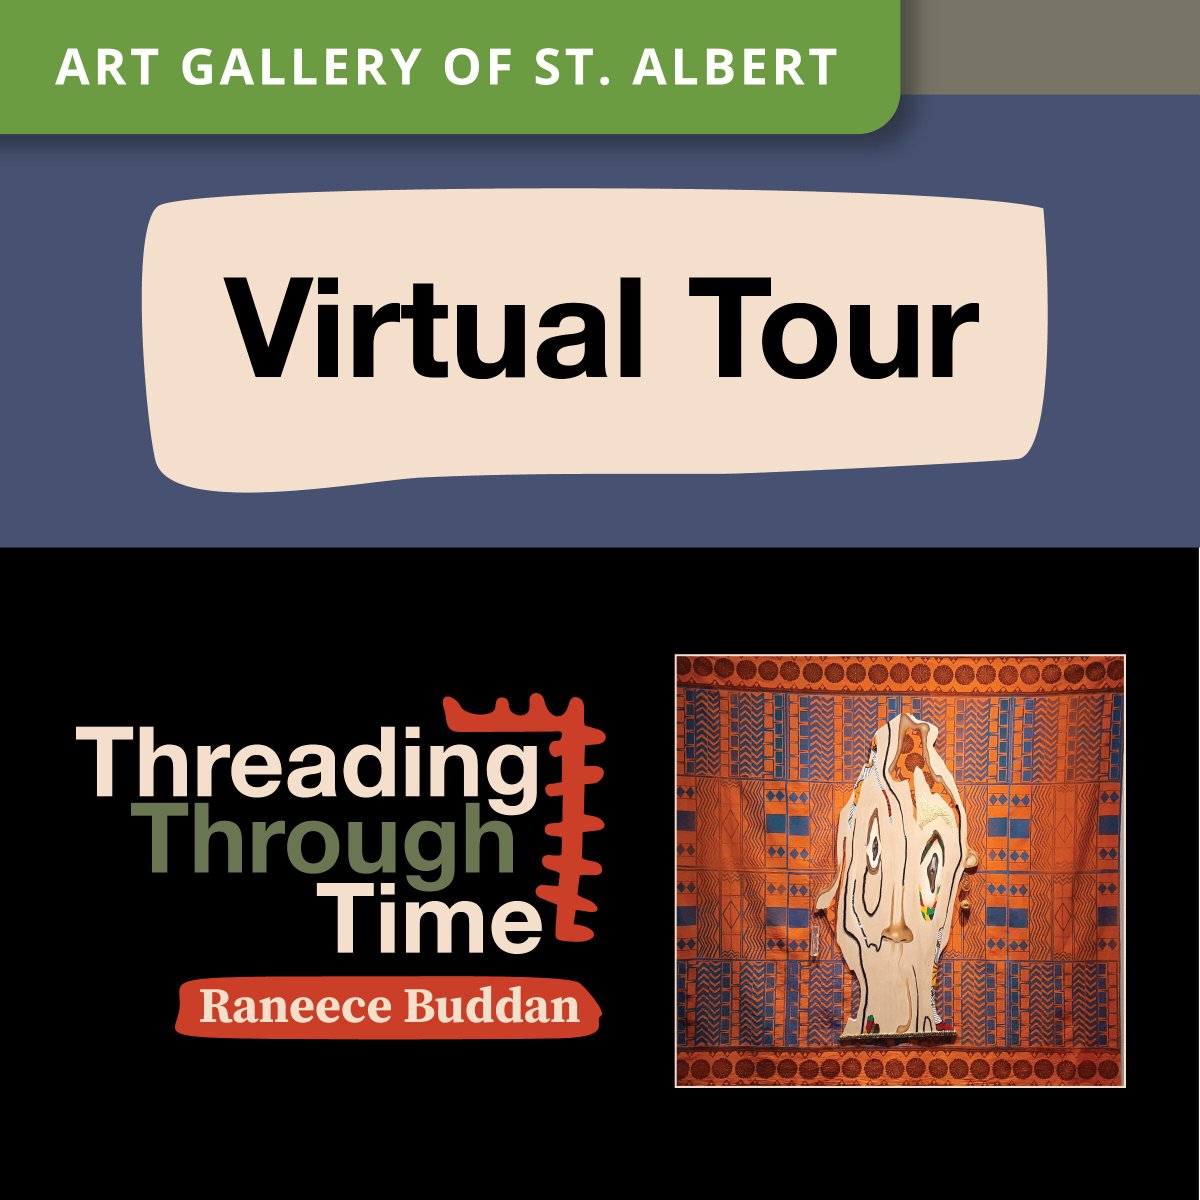 Our virtual tour of Threading Through Time goes live on Facebook live today! Tune in at noon (or anytime afterwards) to join our curator for a walk through this fantastic exhibition. #t8n #yeg #art #canadianartist #canadianart #visualartist #abstract #textileart #ceramics